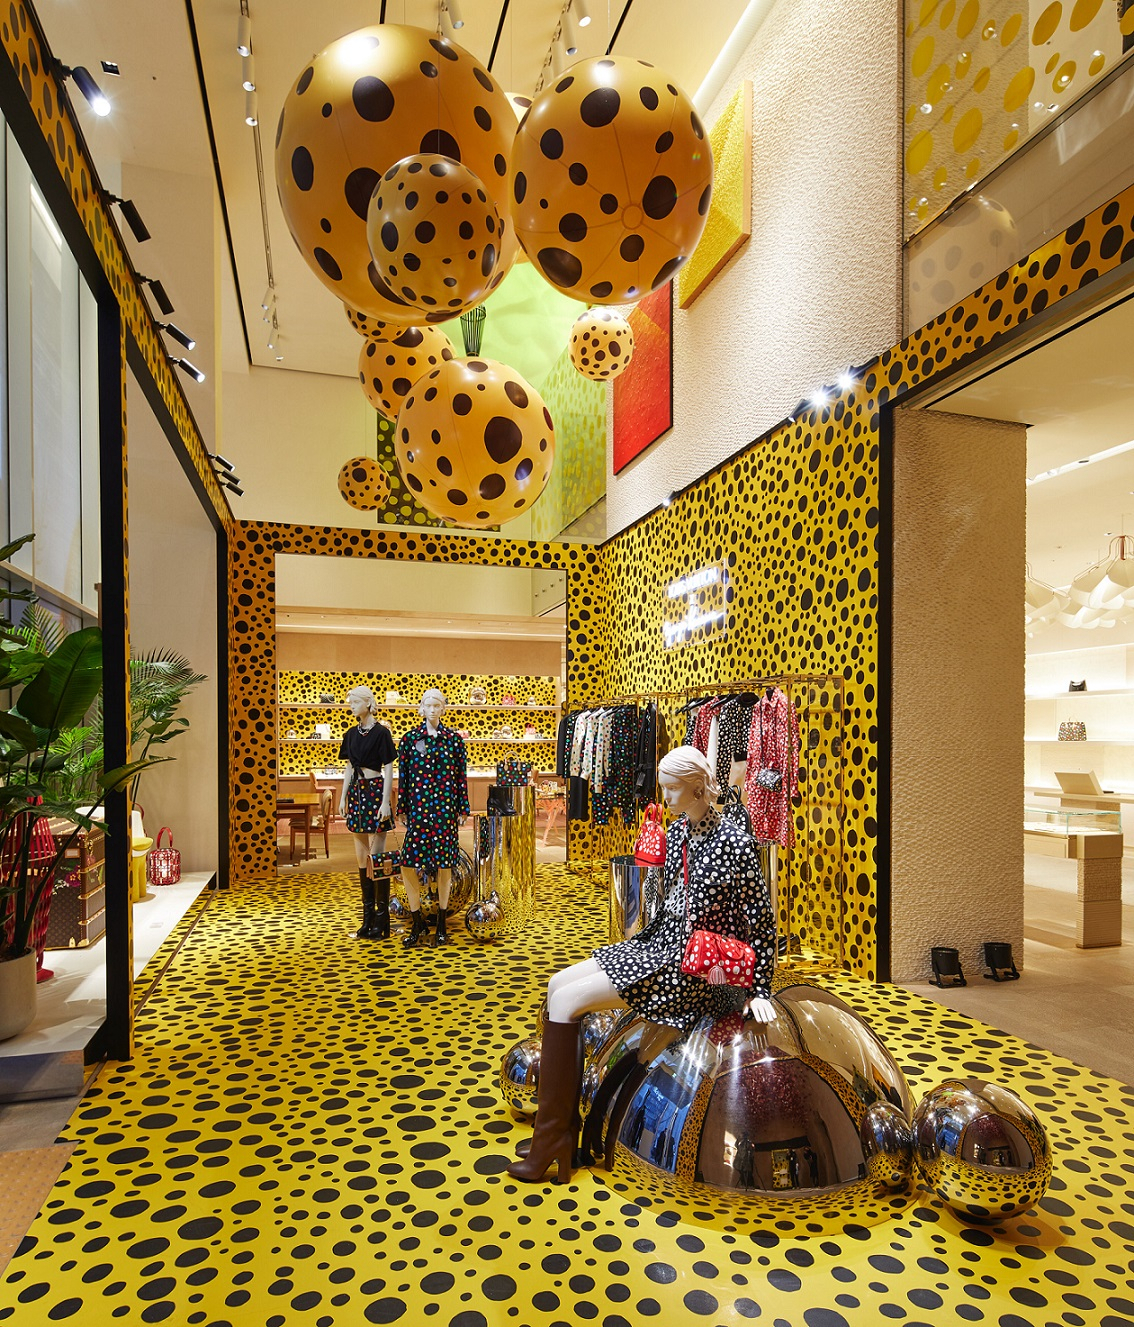 The Louis Vuitton Maison Seoul in Gangnam-gu, Seoul, shows its collaboration collection with Japanese artist Yayoi Kusama. (Louis Vuitton Maison Seoul)